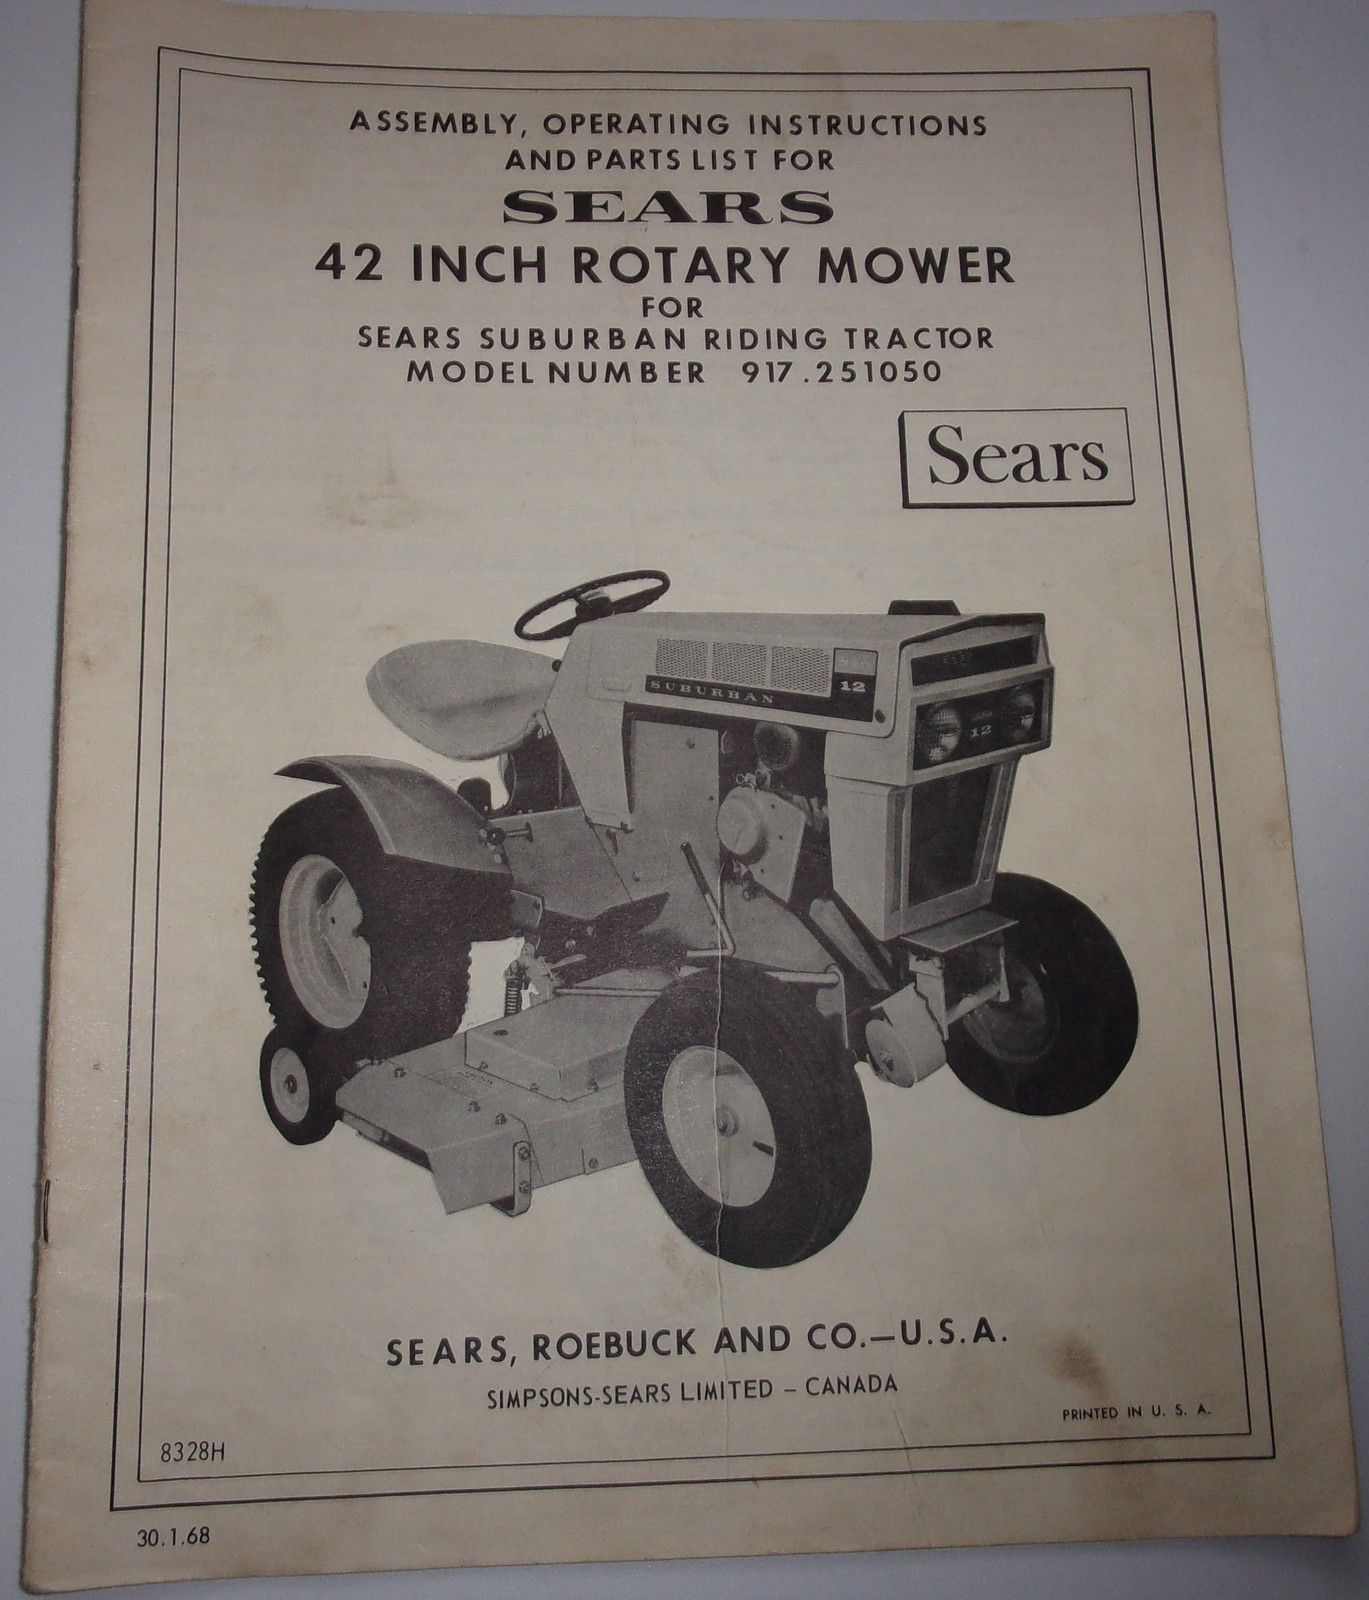 Primary image for Sears 42” Rotary Mower Assembly Operating Instructions & Parts List 917.251050